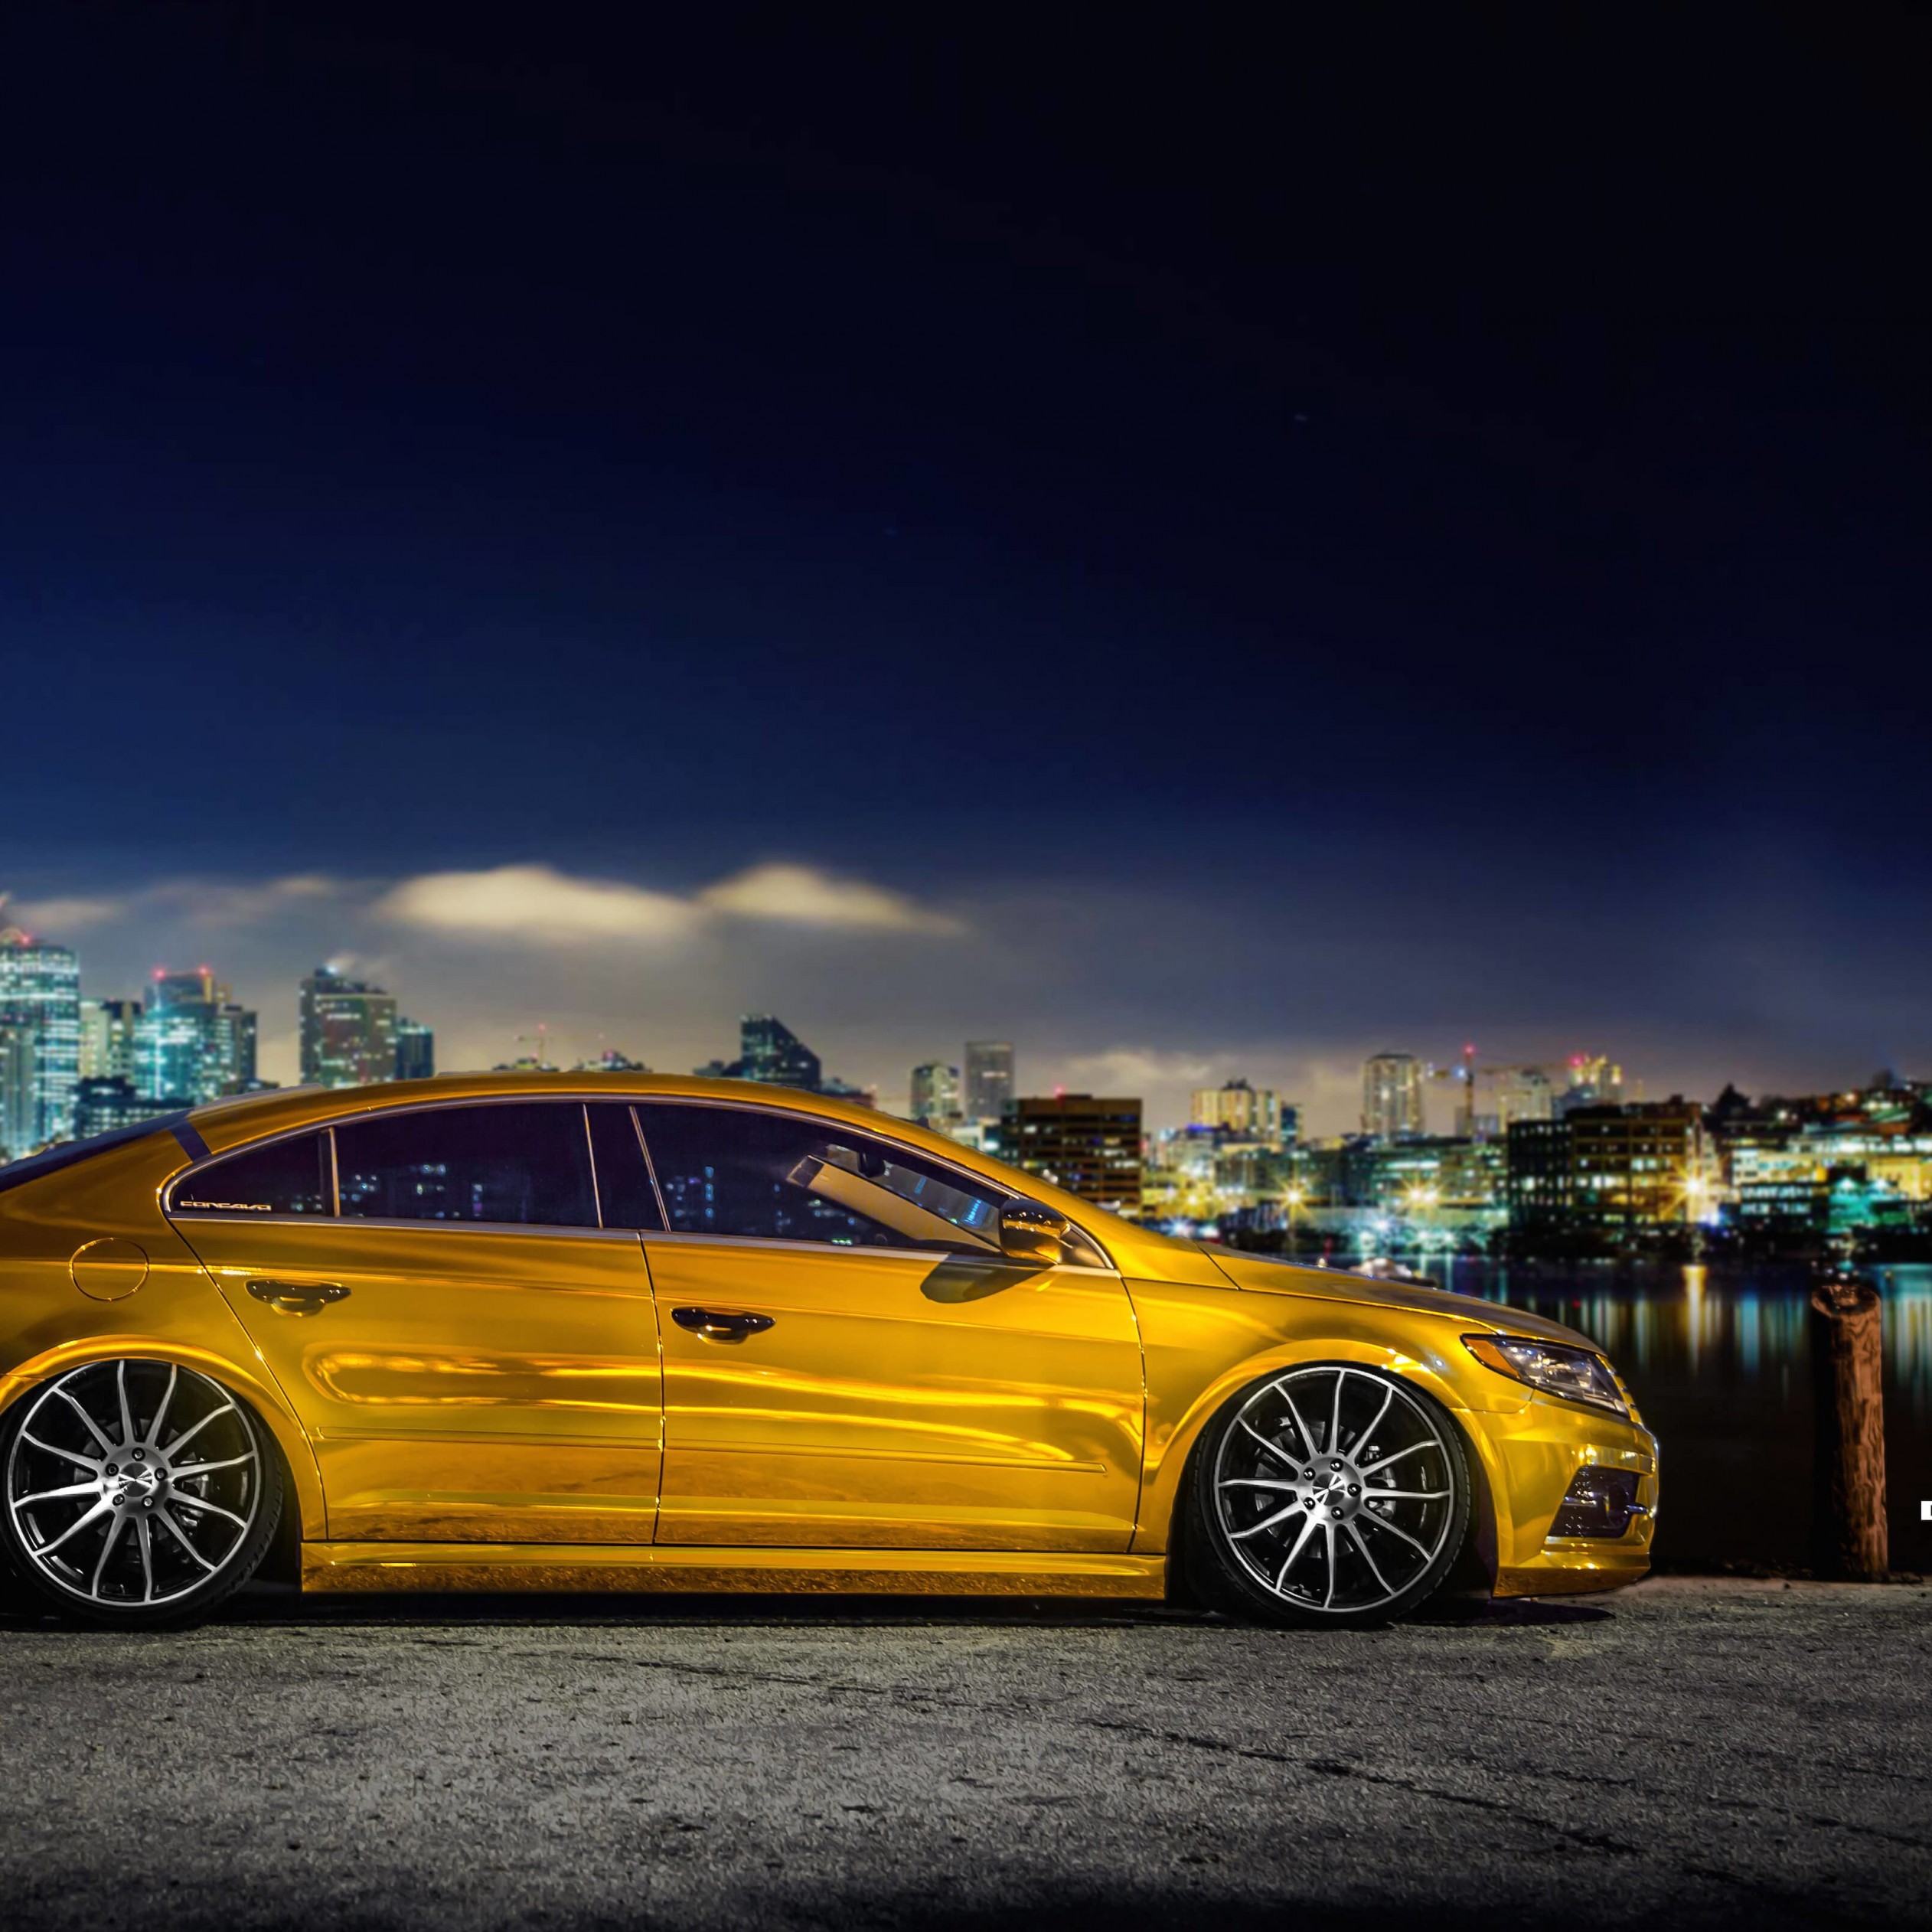 Volkswagen CC on CW-12 Concave Wheels Wallpaper for Apple iPad 3